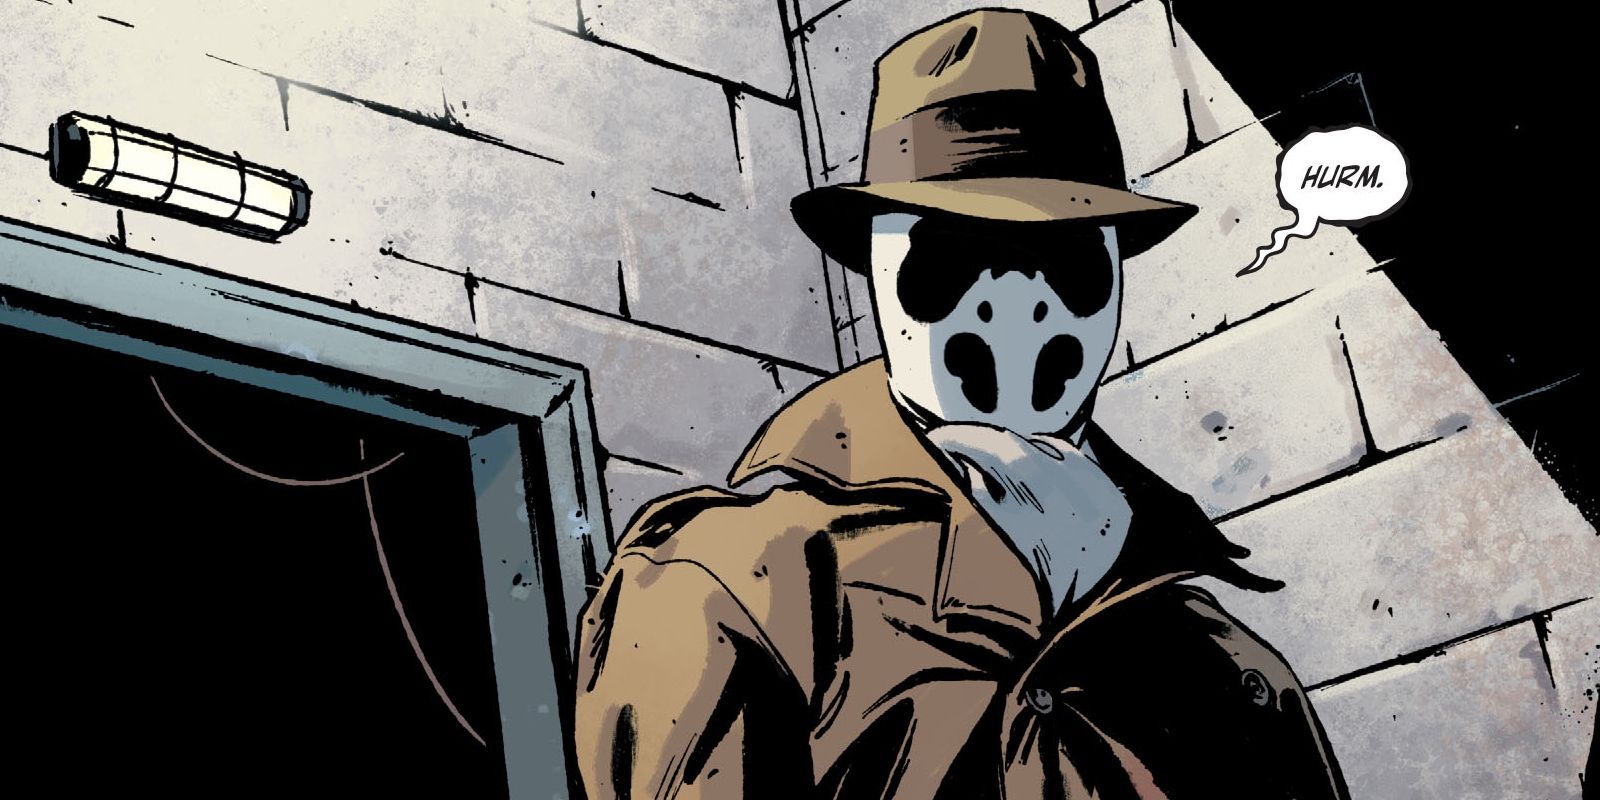 Rorschach from Watchmen analyzes the room he's in